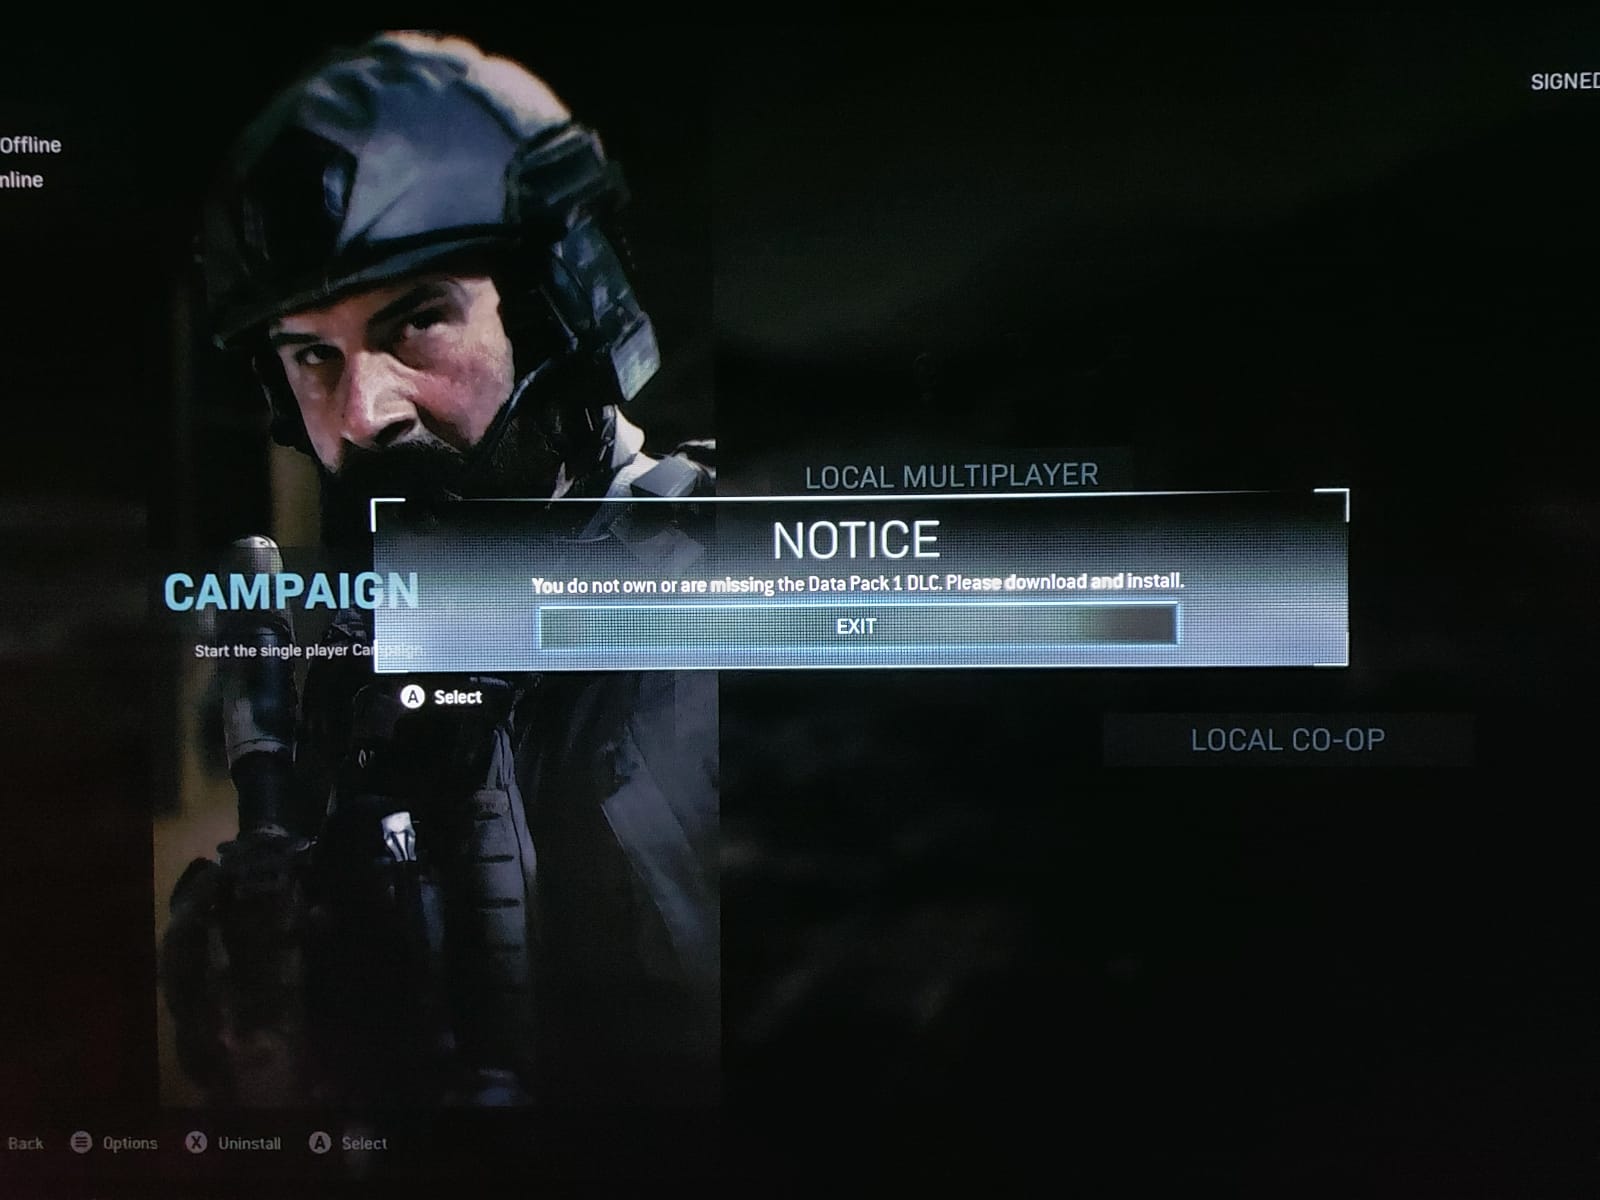 Call Of Duty Modern Warfare not allowing me to play campaign